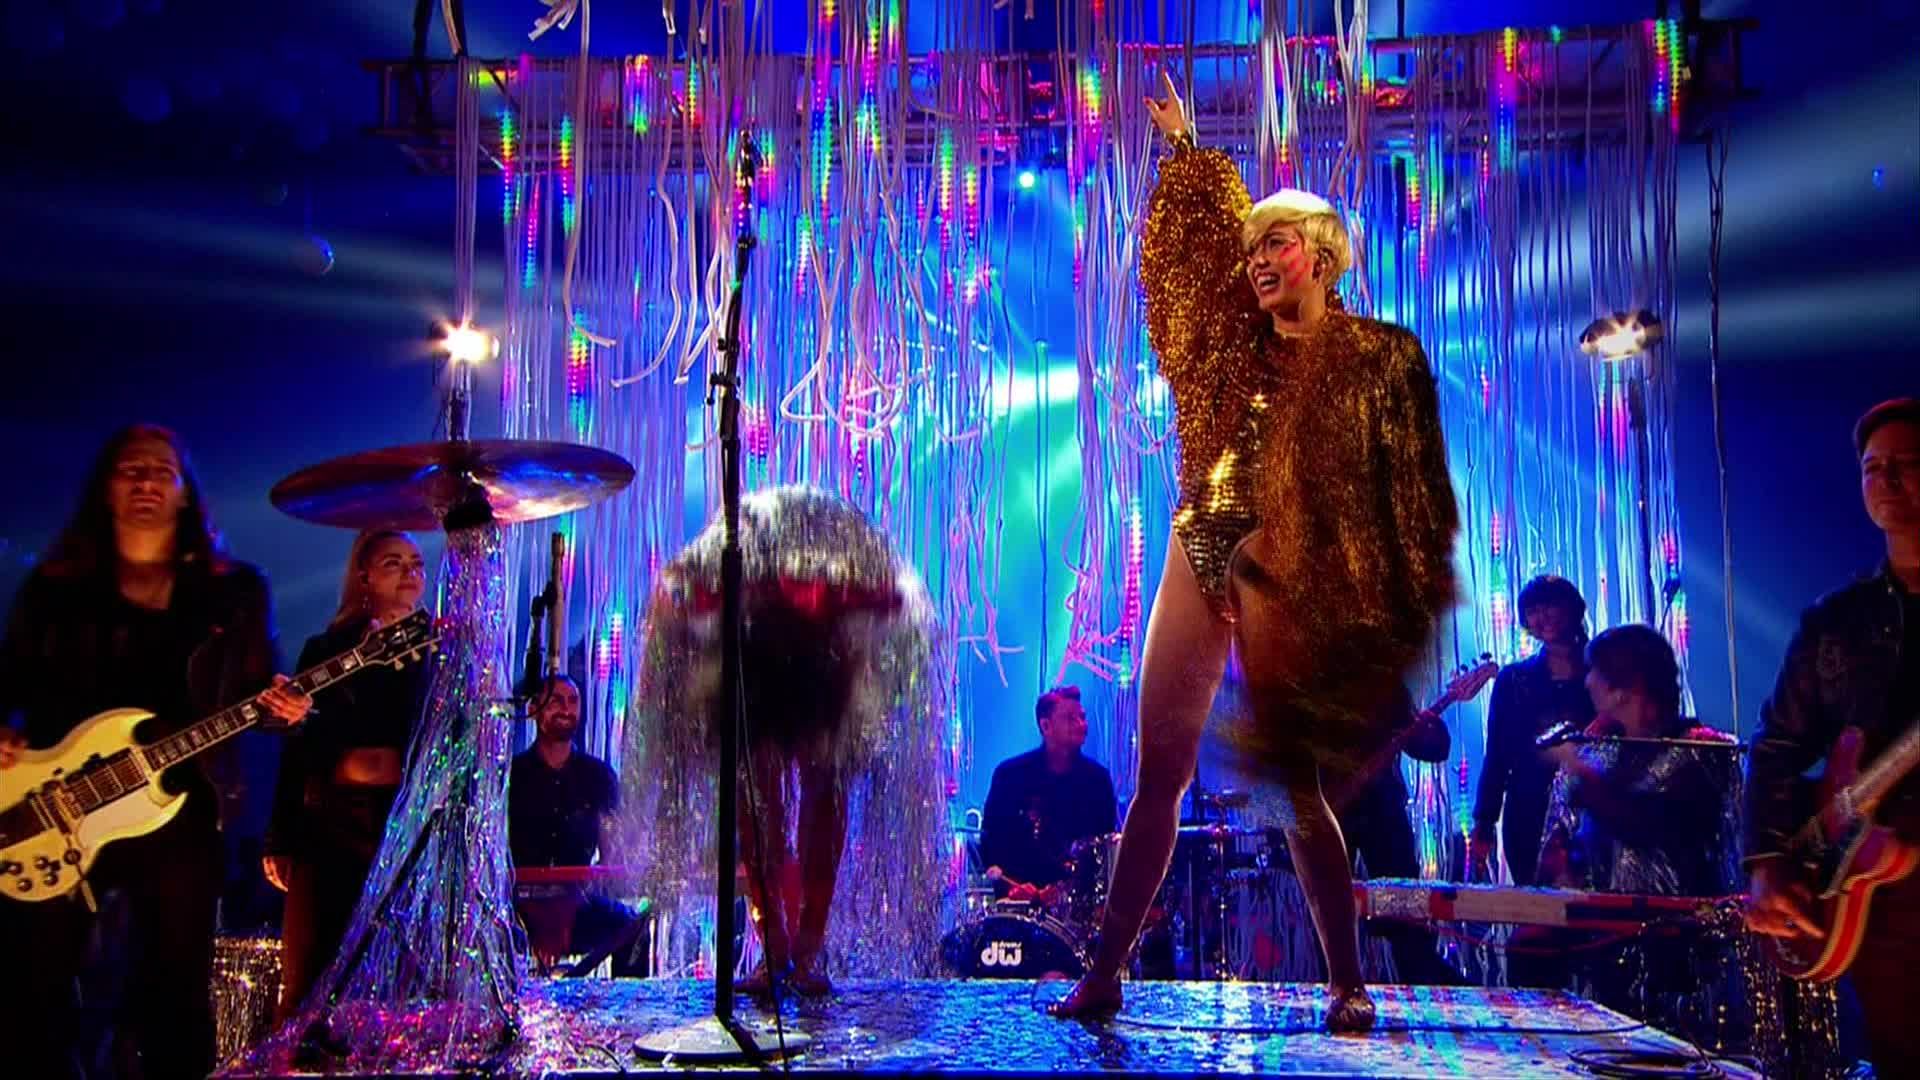 Miley Cyrus [ft The Flaming Lips] - 2014-05-18, Billboard Music Awards - 1080 TS - LSD preview 30